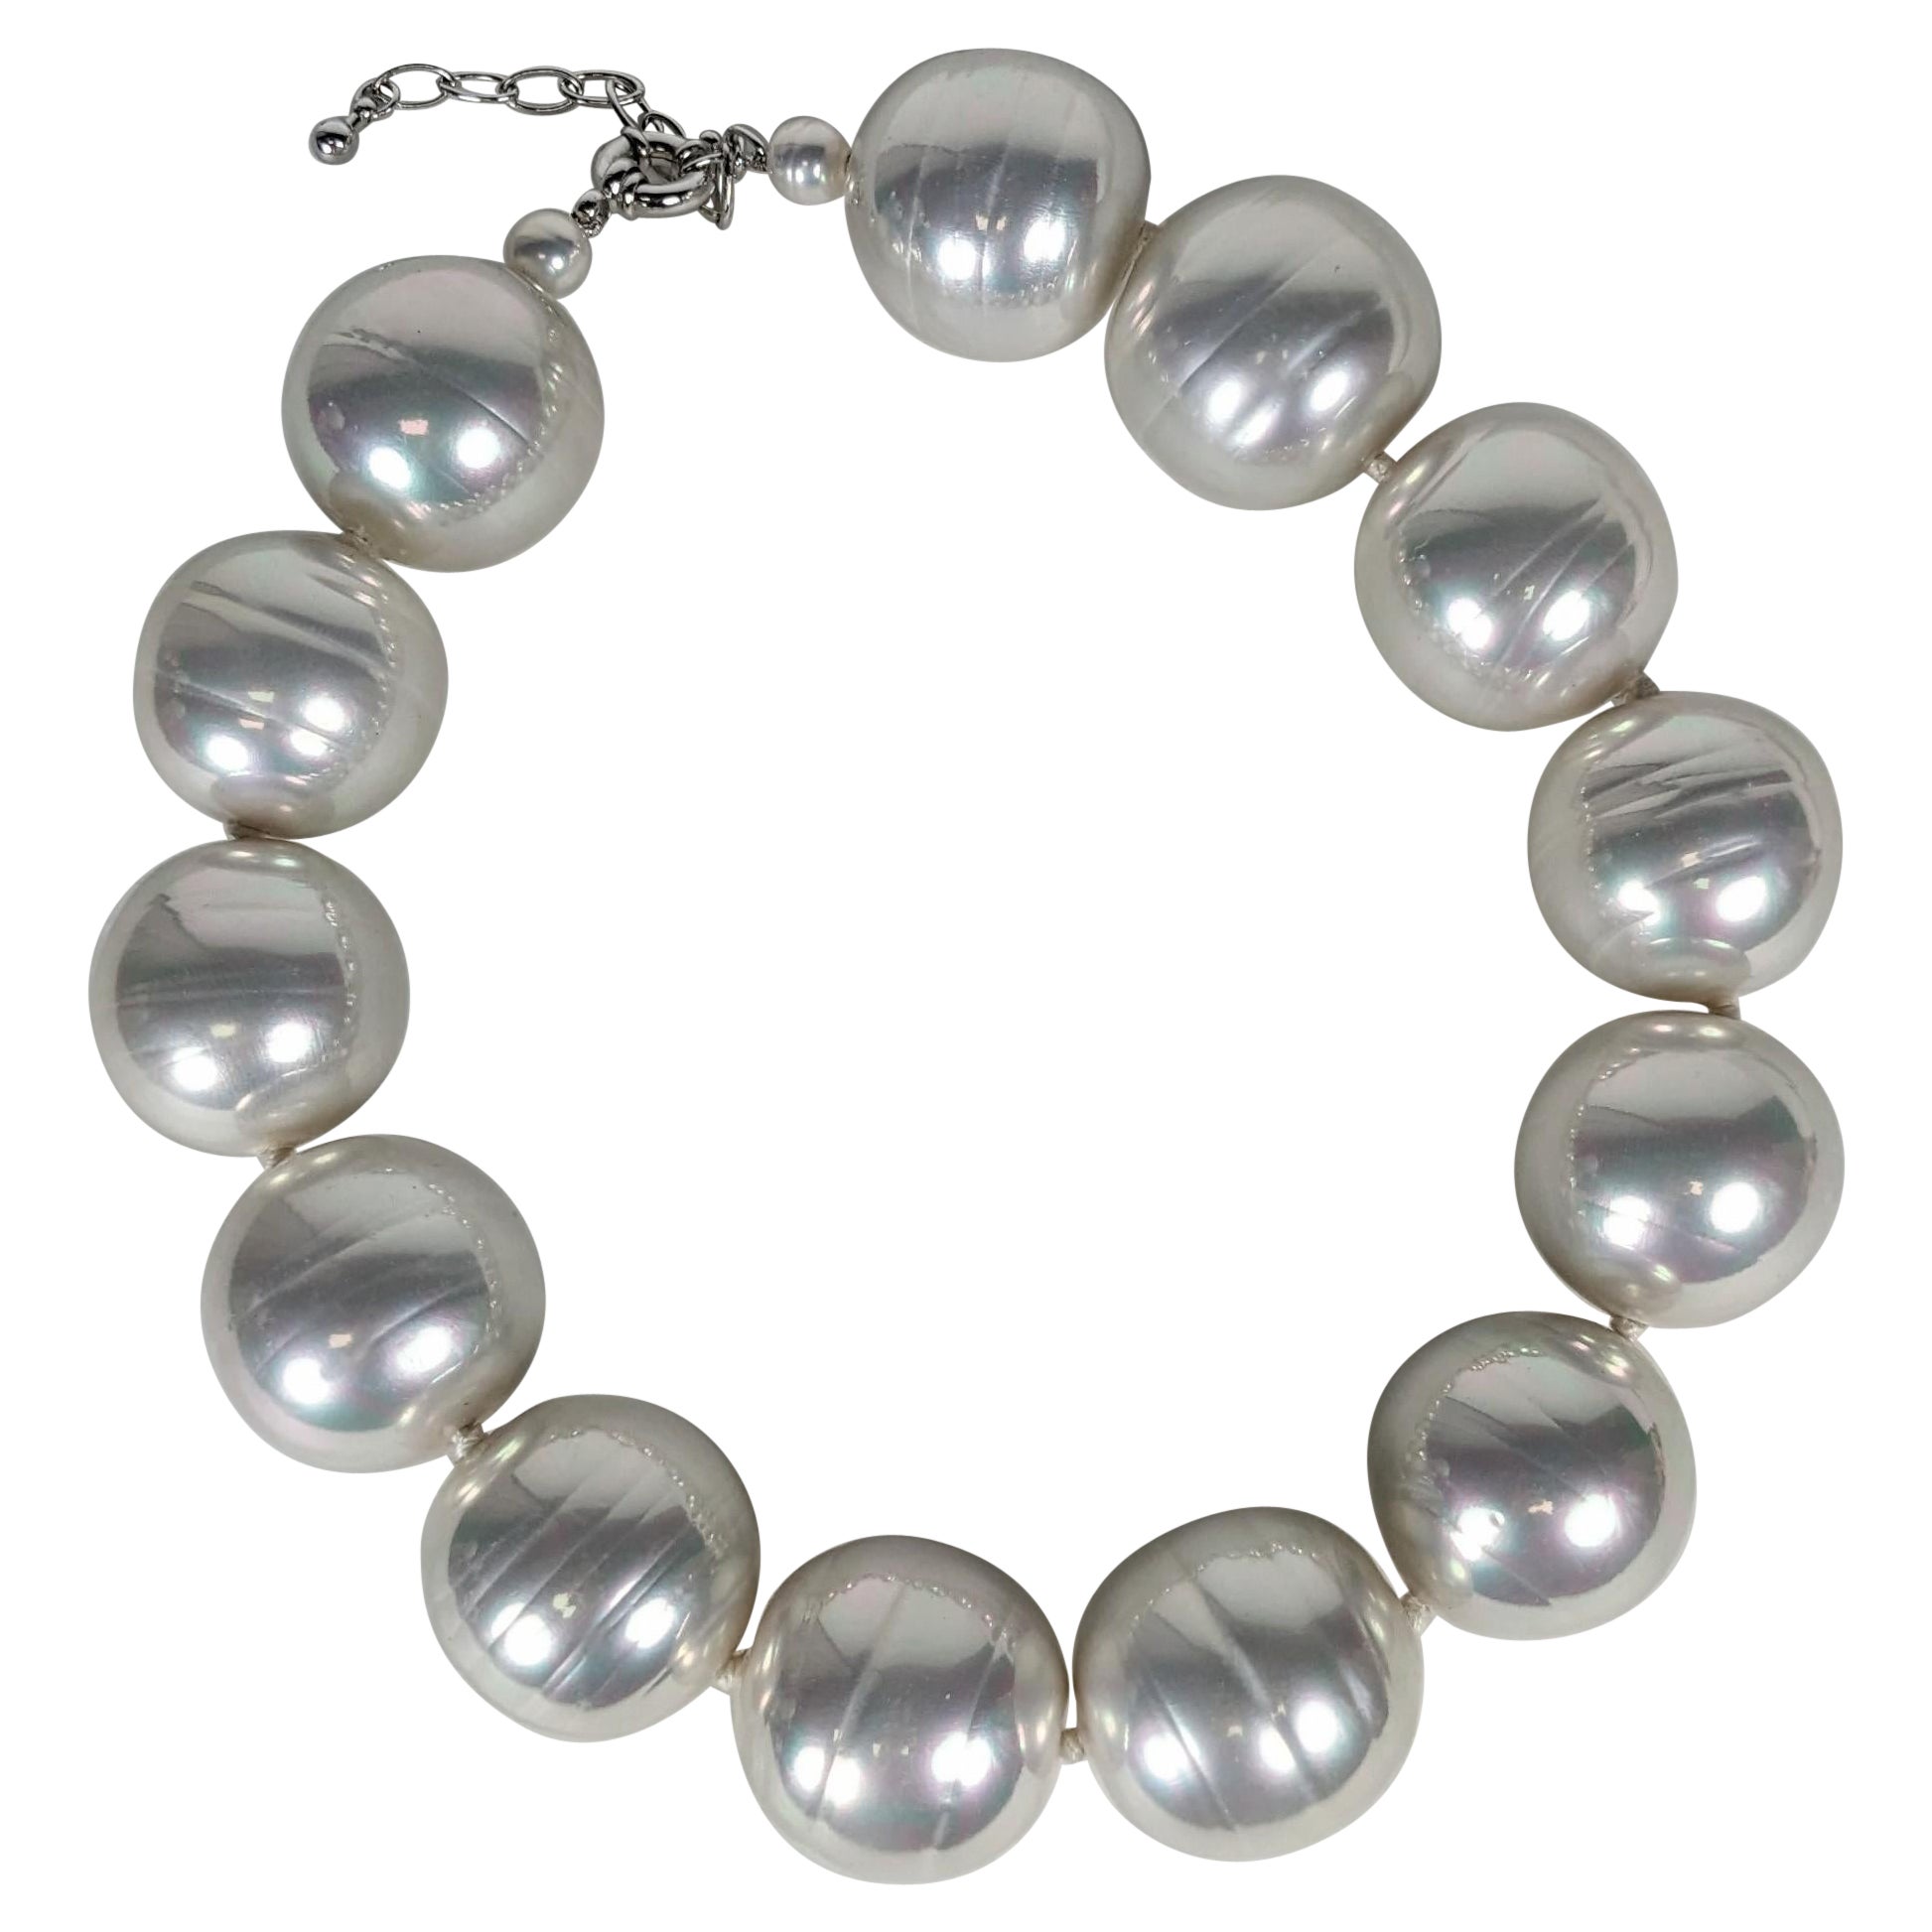 Oversized Faux Baroque Pearls